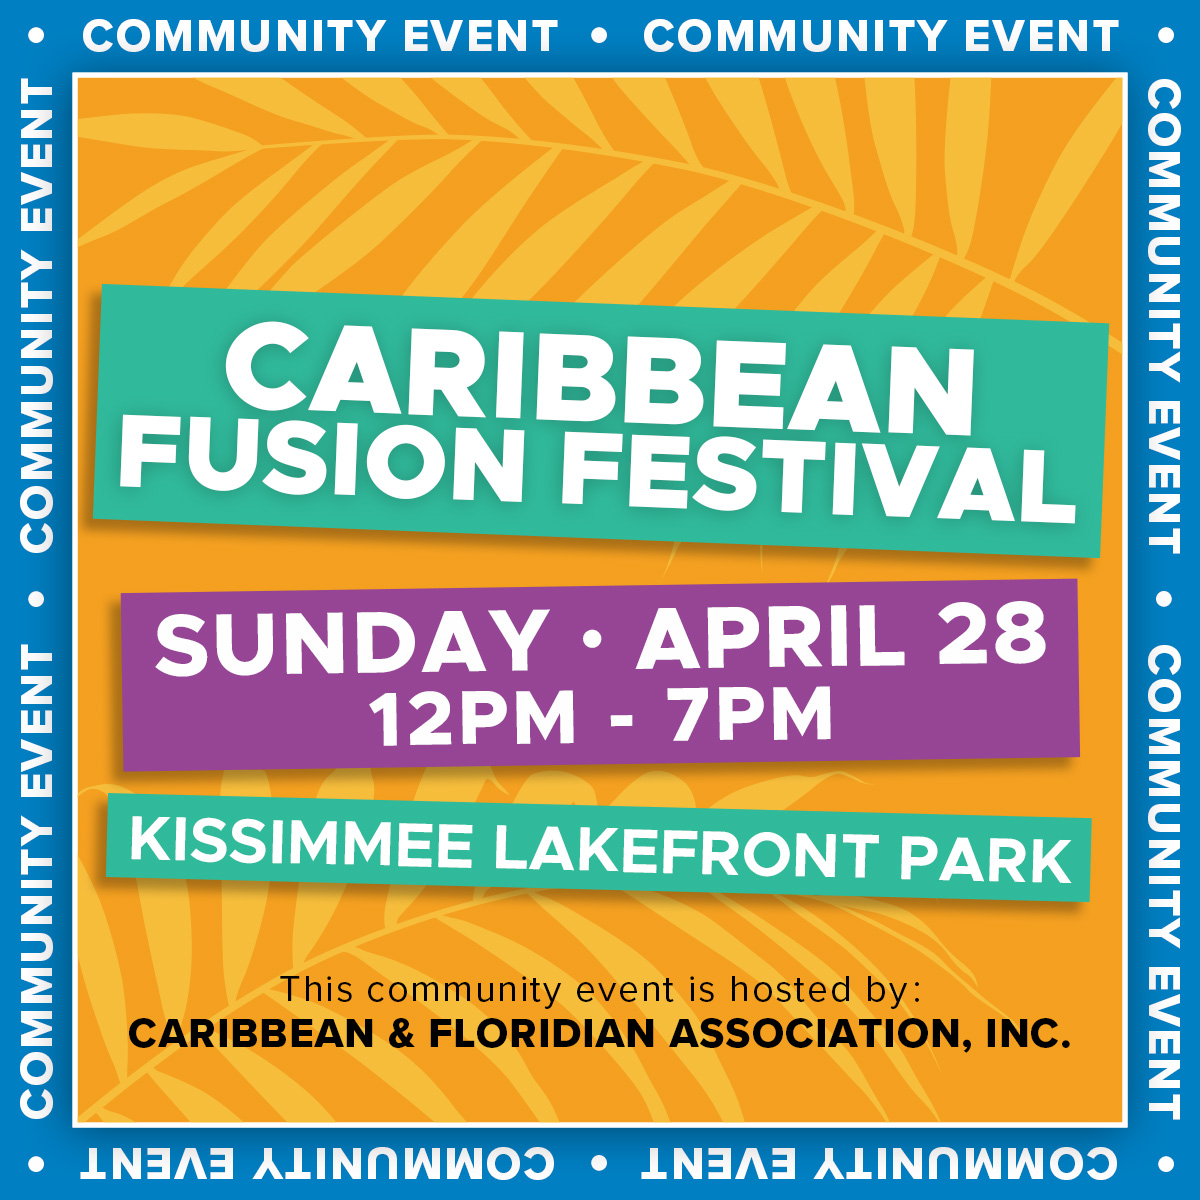 The Caribbean Fusion Festival is a dynamic, energetic event celebrating Caribbean culture. It features food, drinks, live music, and more. 🗓️ April 28 • 12 pm - 7 pm 📍 Kissimmee Lakefront Park 📝 Hosted by Caribbean and Floridian Association, Inc.